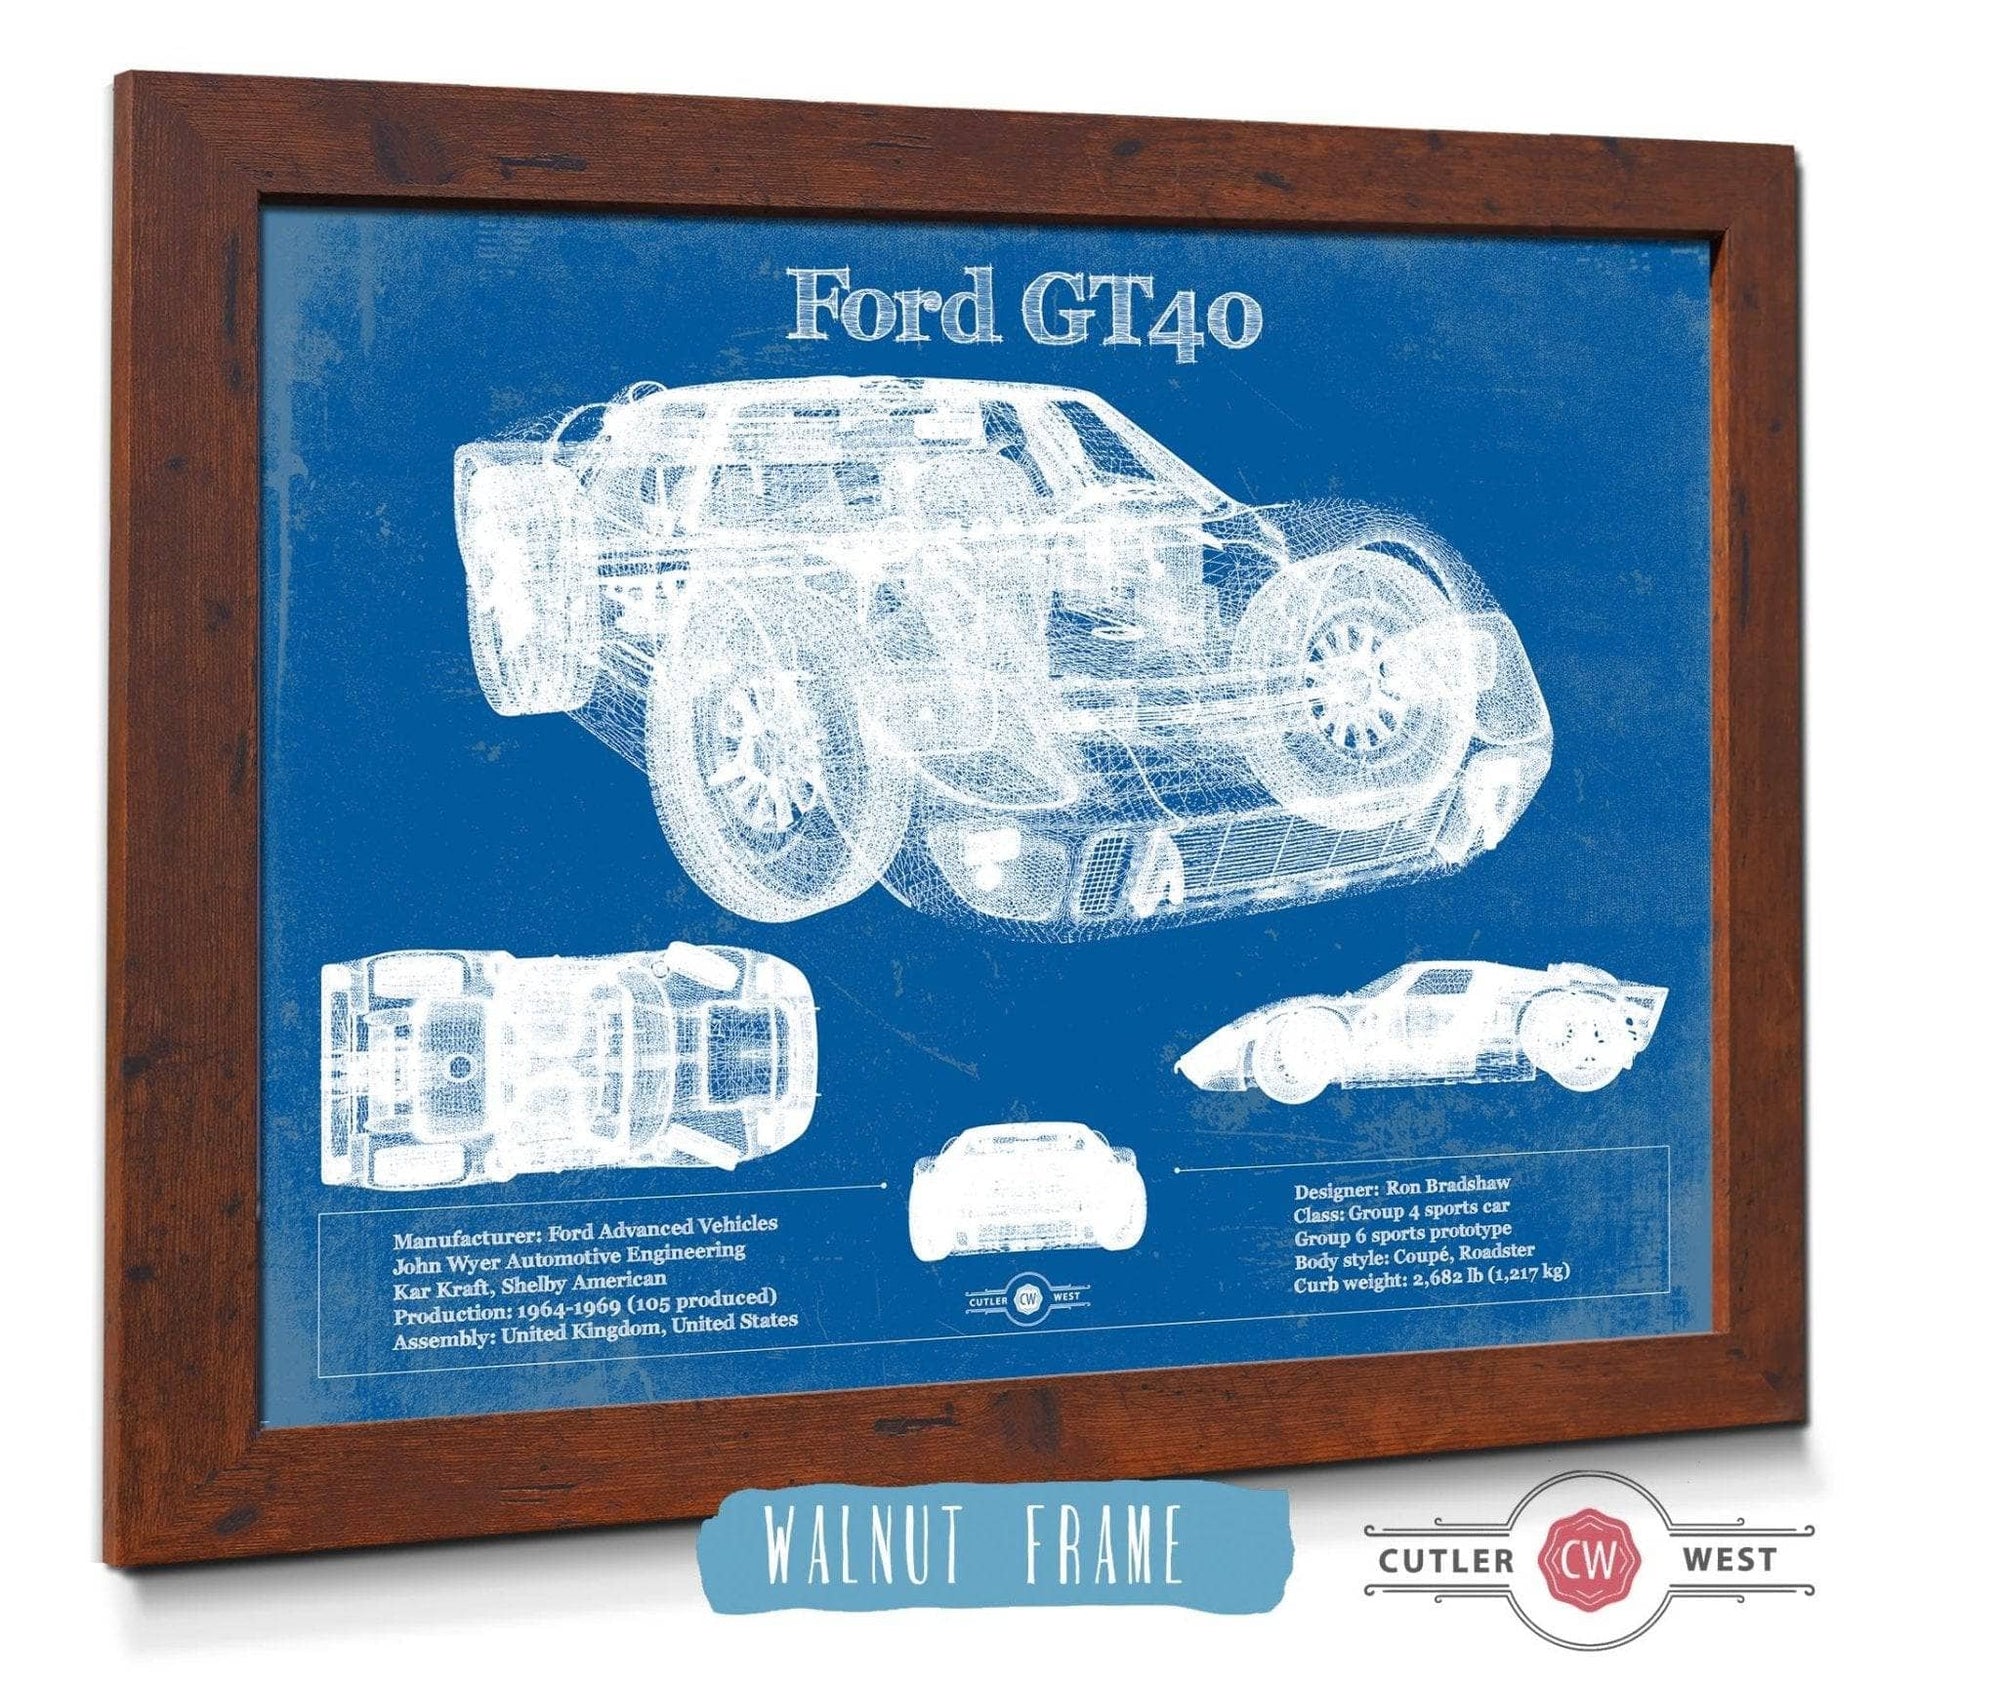 Cutler West Ford Collection 14" x 11" / Walnut Frame Ford GT40 Blueprint Vintage Auto Print 933350036_18067